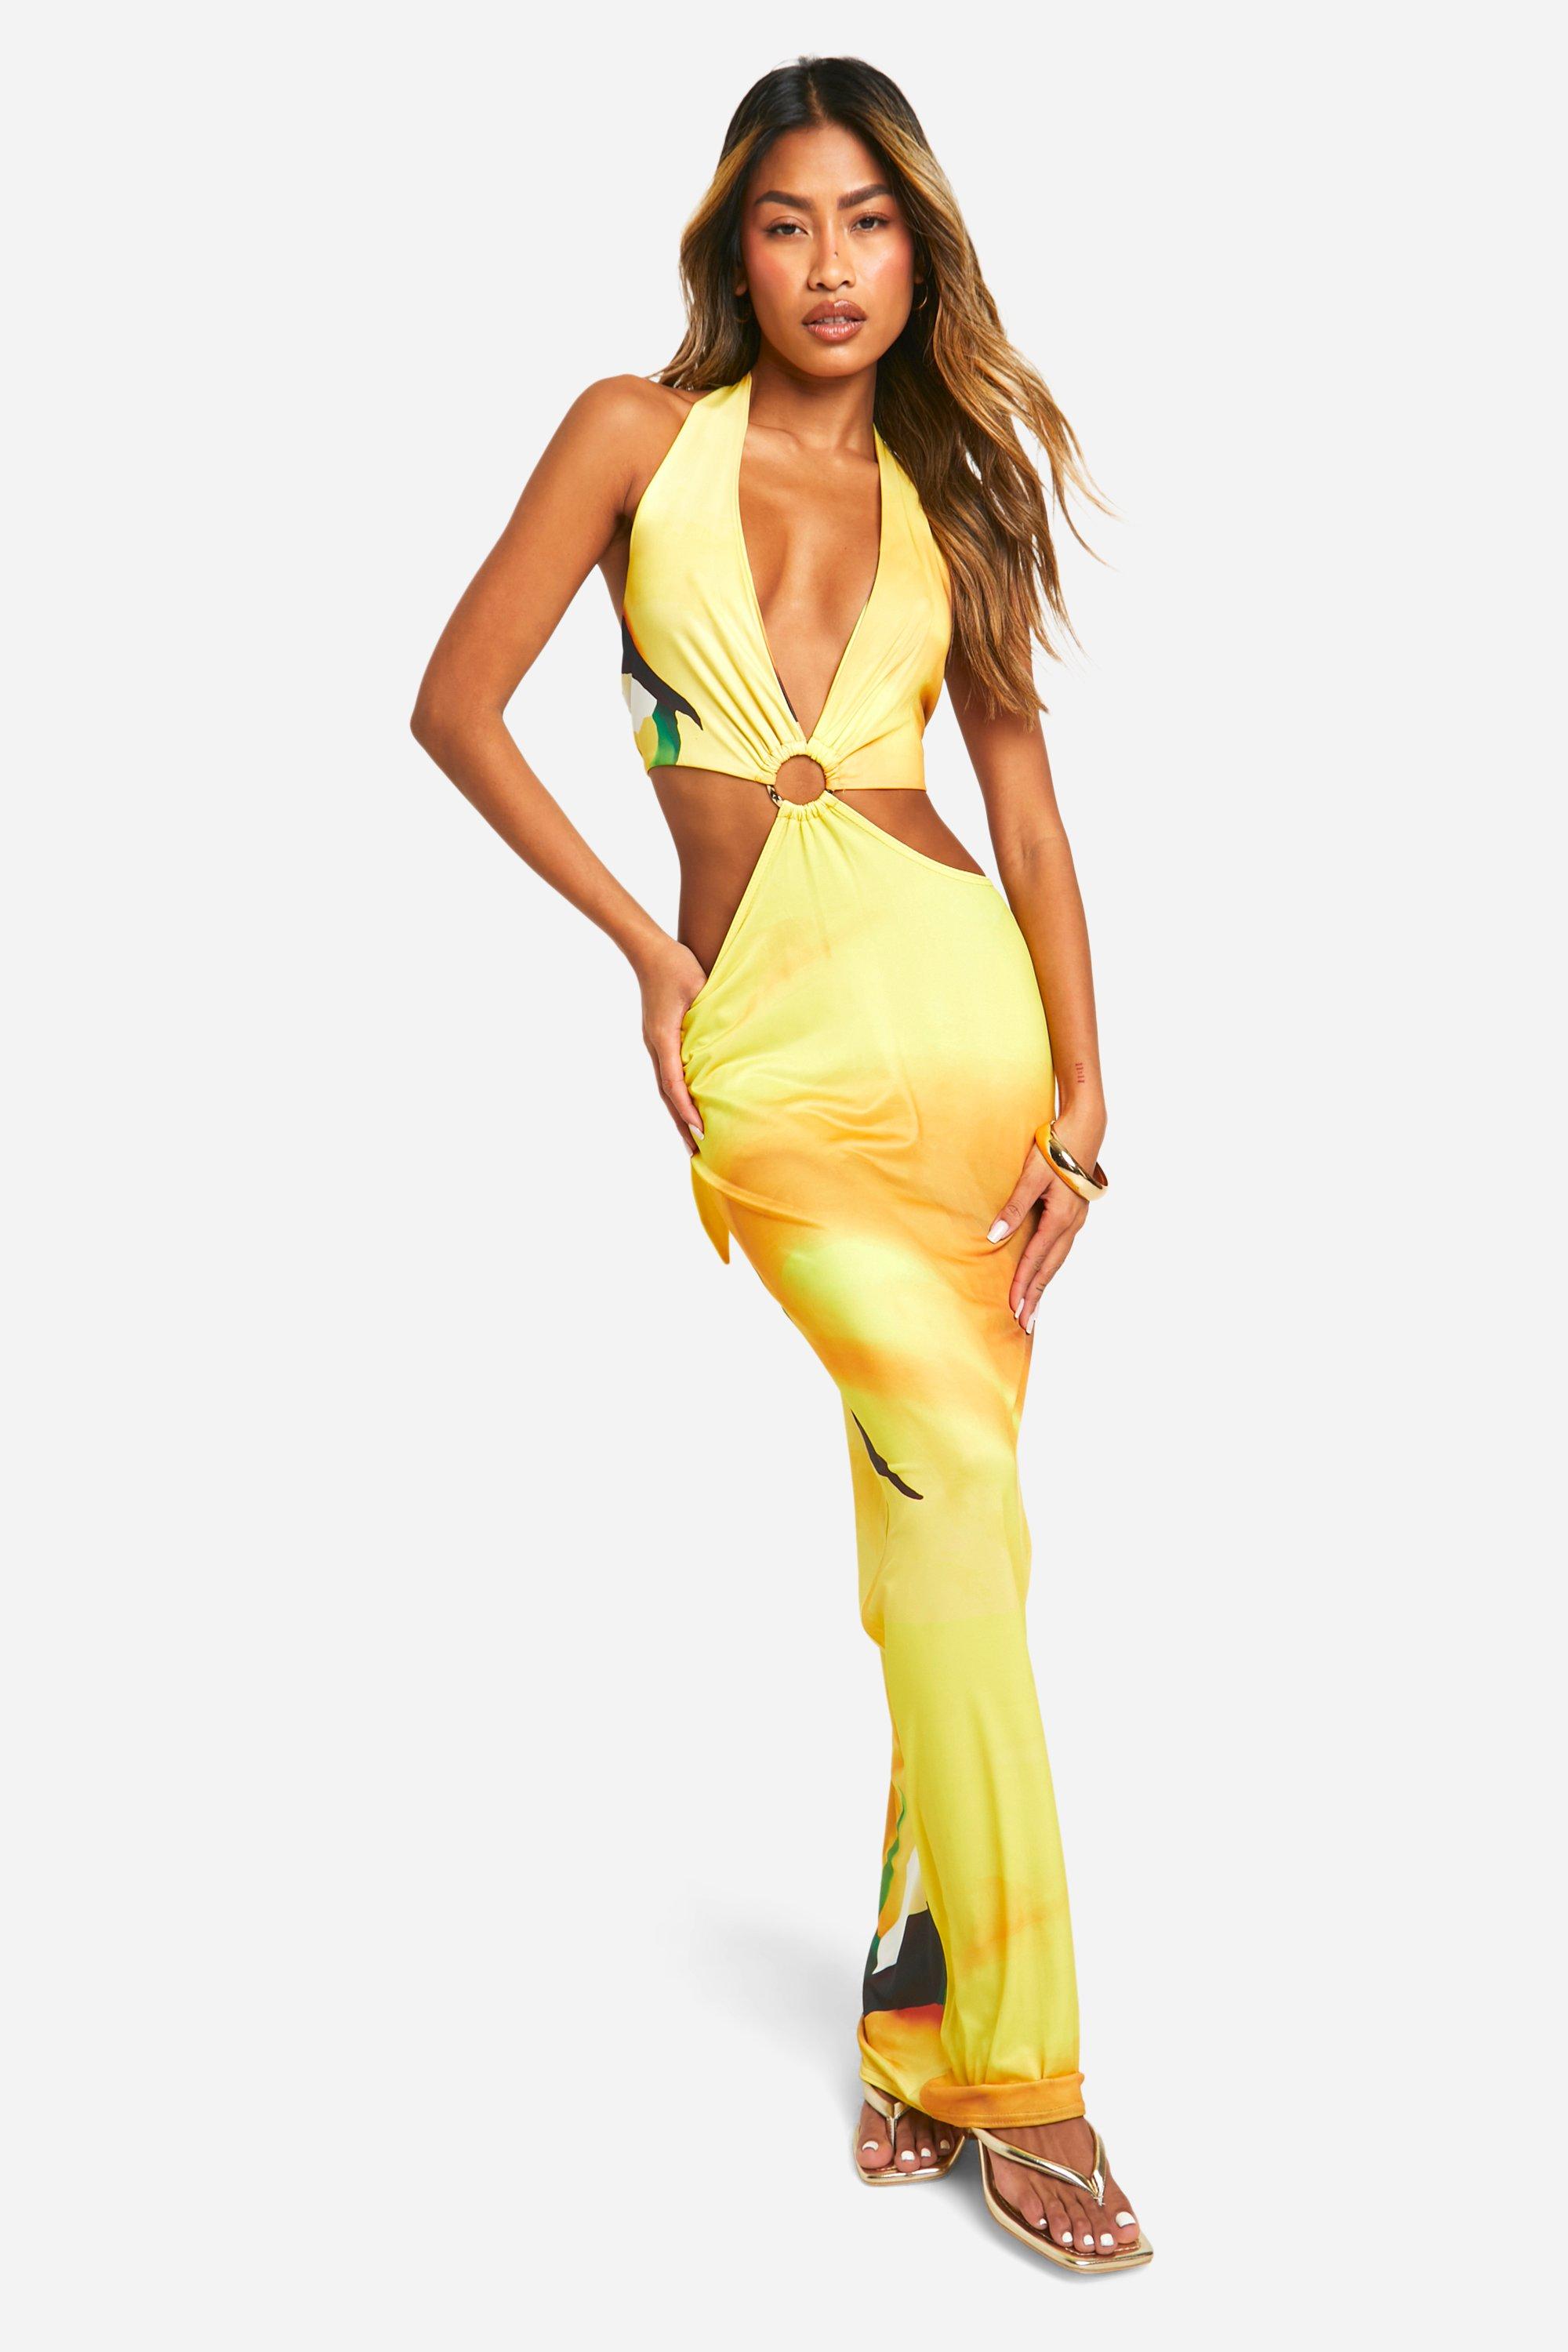 Boohoo Gold Trim Printed Plunge Cut Out Slinky Maxi Dress, Yellow